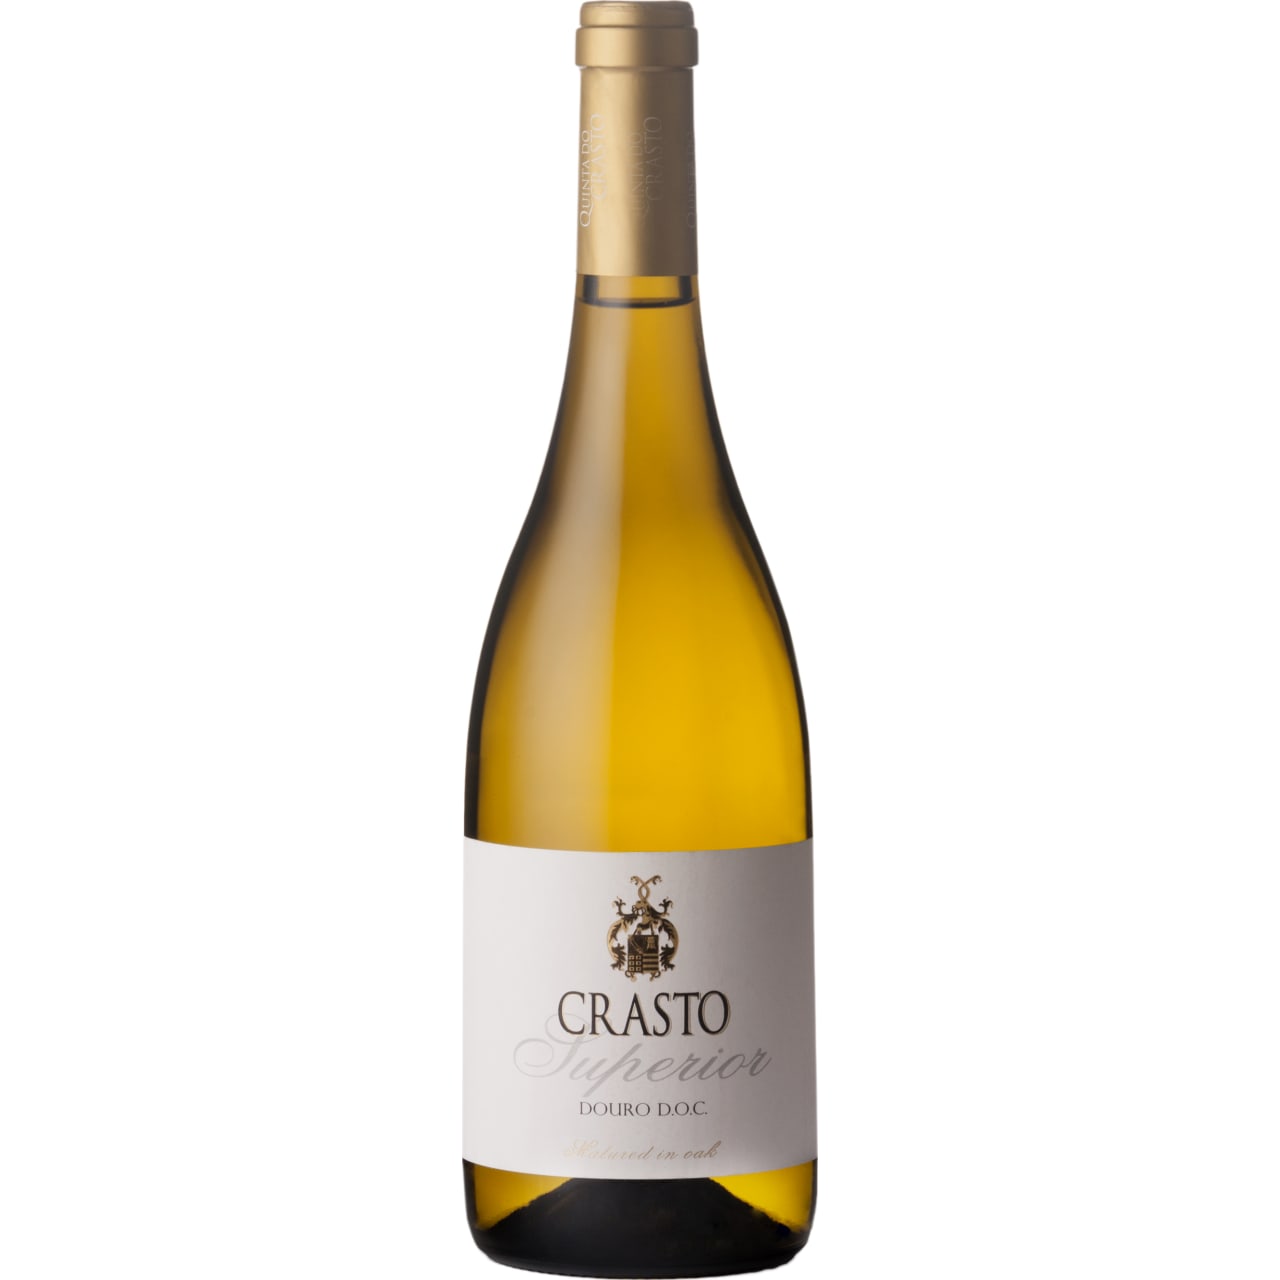 A white Burgundy lookalike and a seriously sumptuous bottle - we highly recommend it.